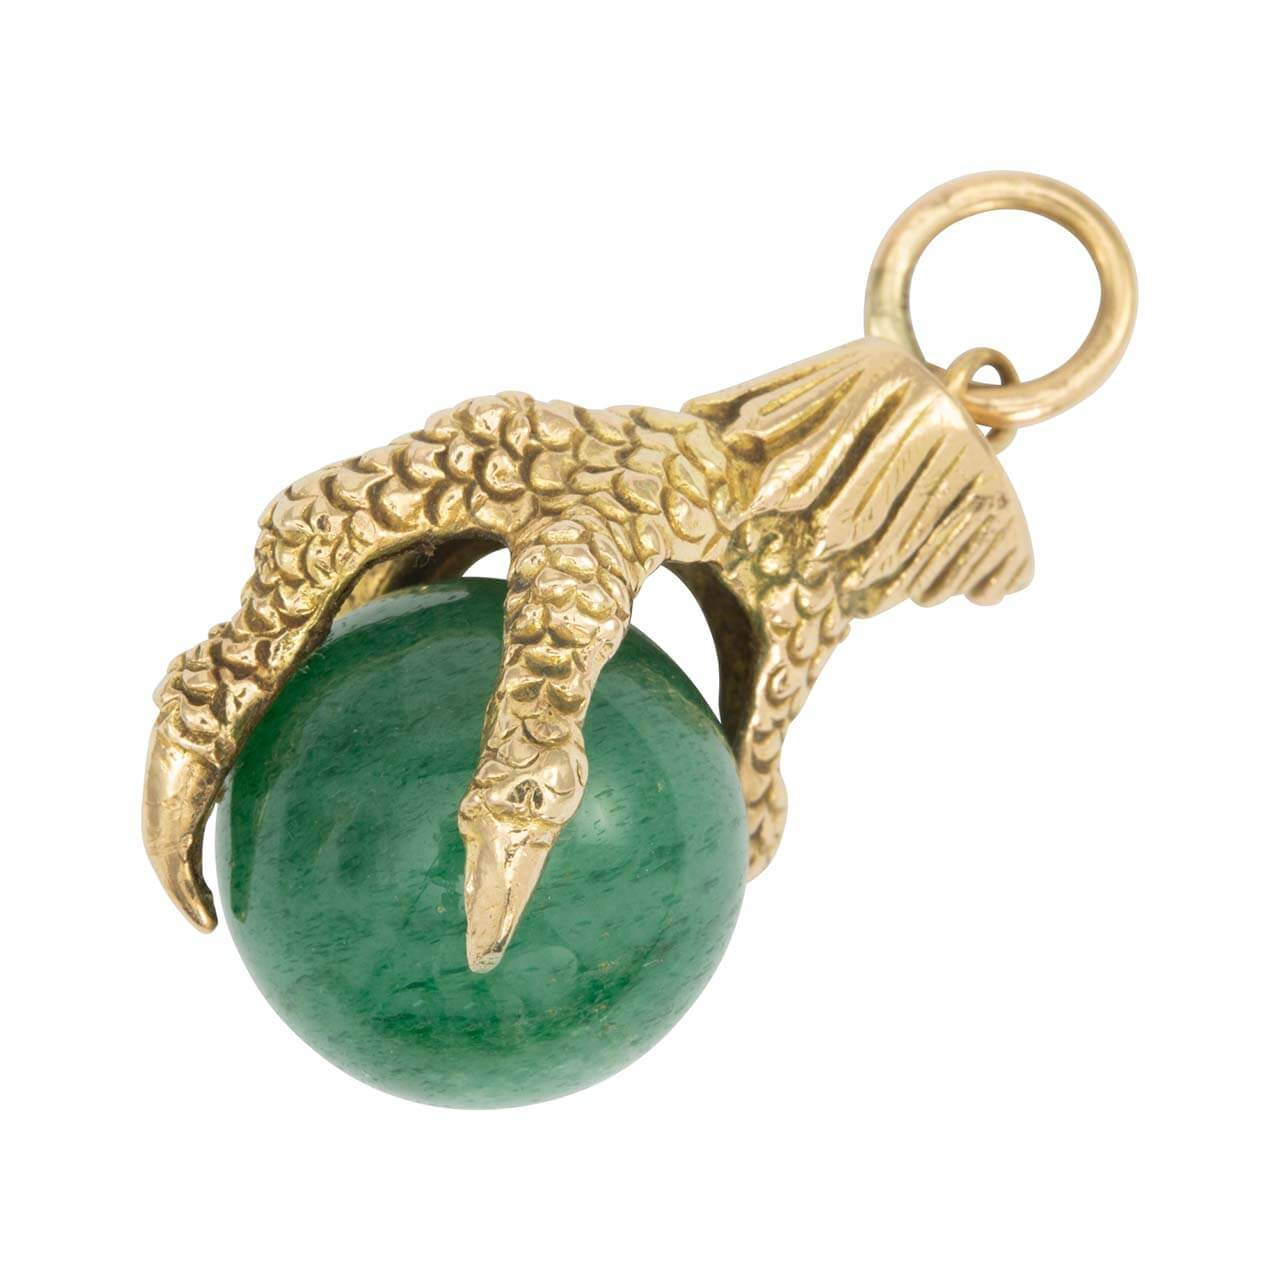 Second Hand Eagle Claw & Sphere Charm